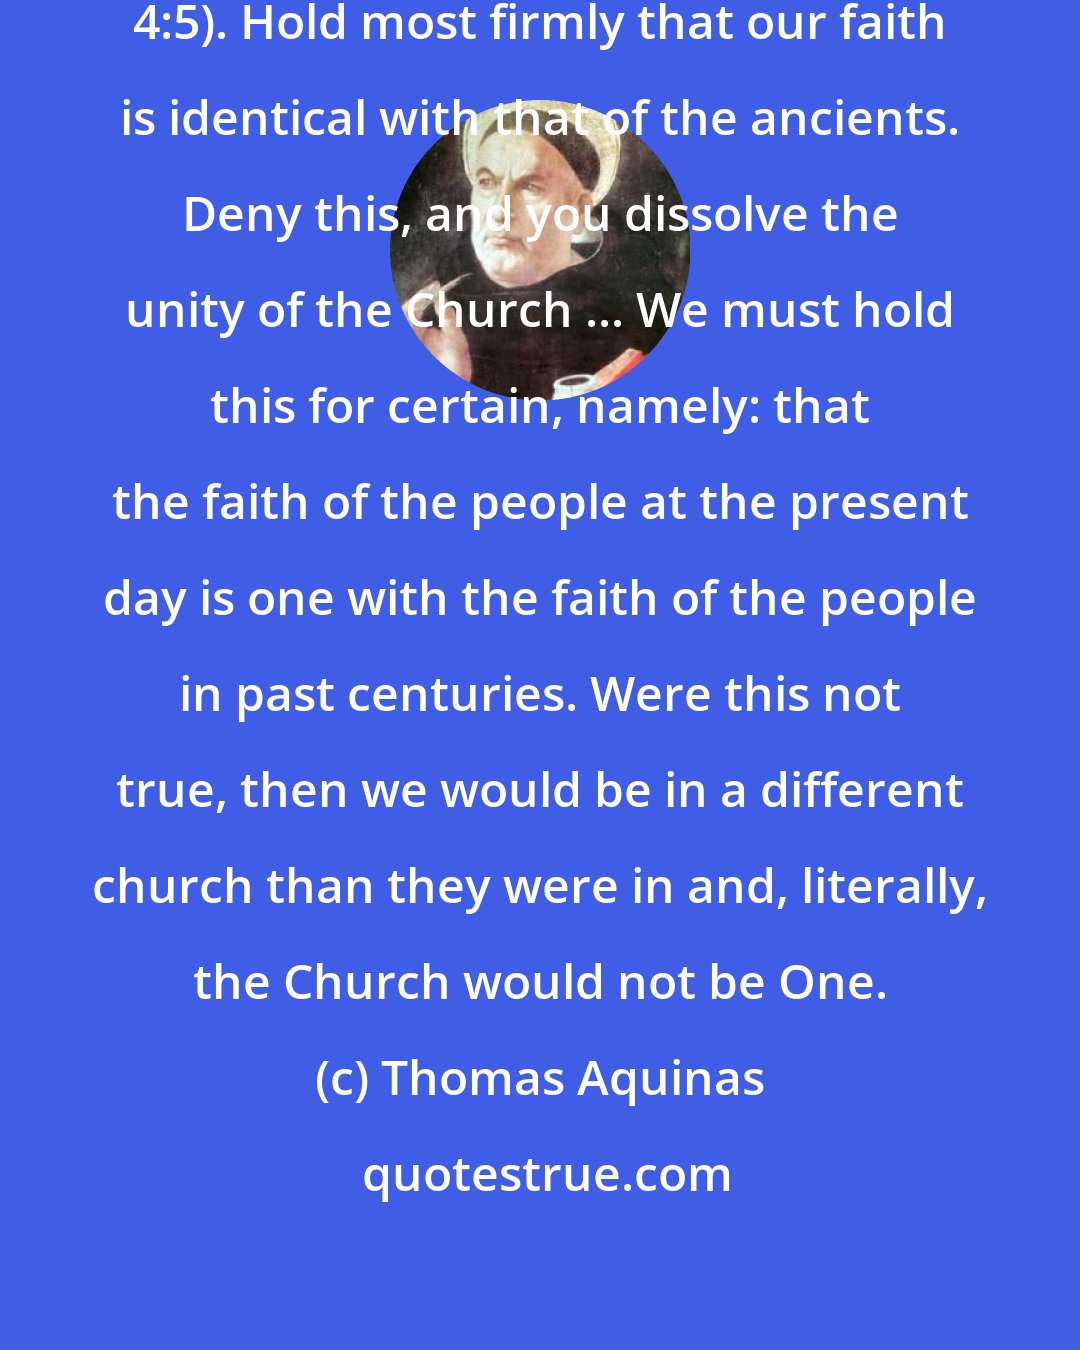 Thomas Aquinas: One faith, St. Paul writes (Eph. 4:5). Hold most firmly that our faith is identical with that of the ancients. Deny this, and you dissolve the unity of the Church ... We must hold this for certain, namely: that the faith of the people at the present day is one with the faith of the people in past centuries. Were this not true, then we would be in a different church than they were in and, literally, the Church would not be One.